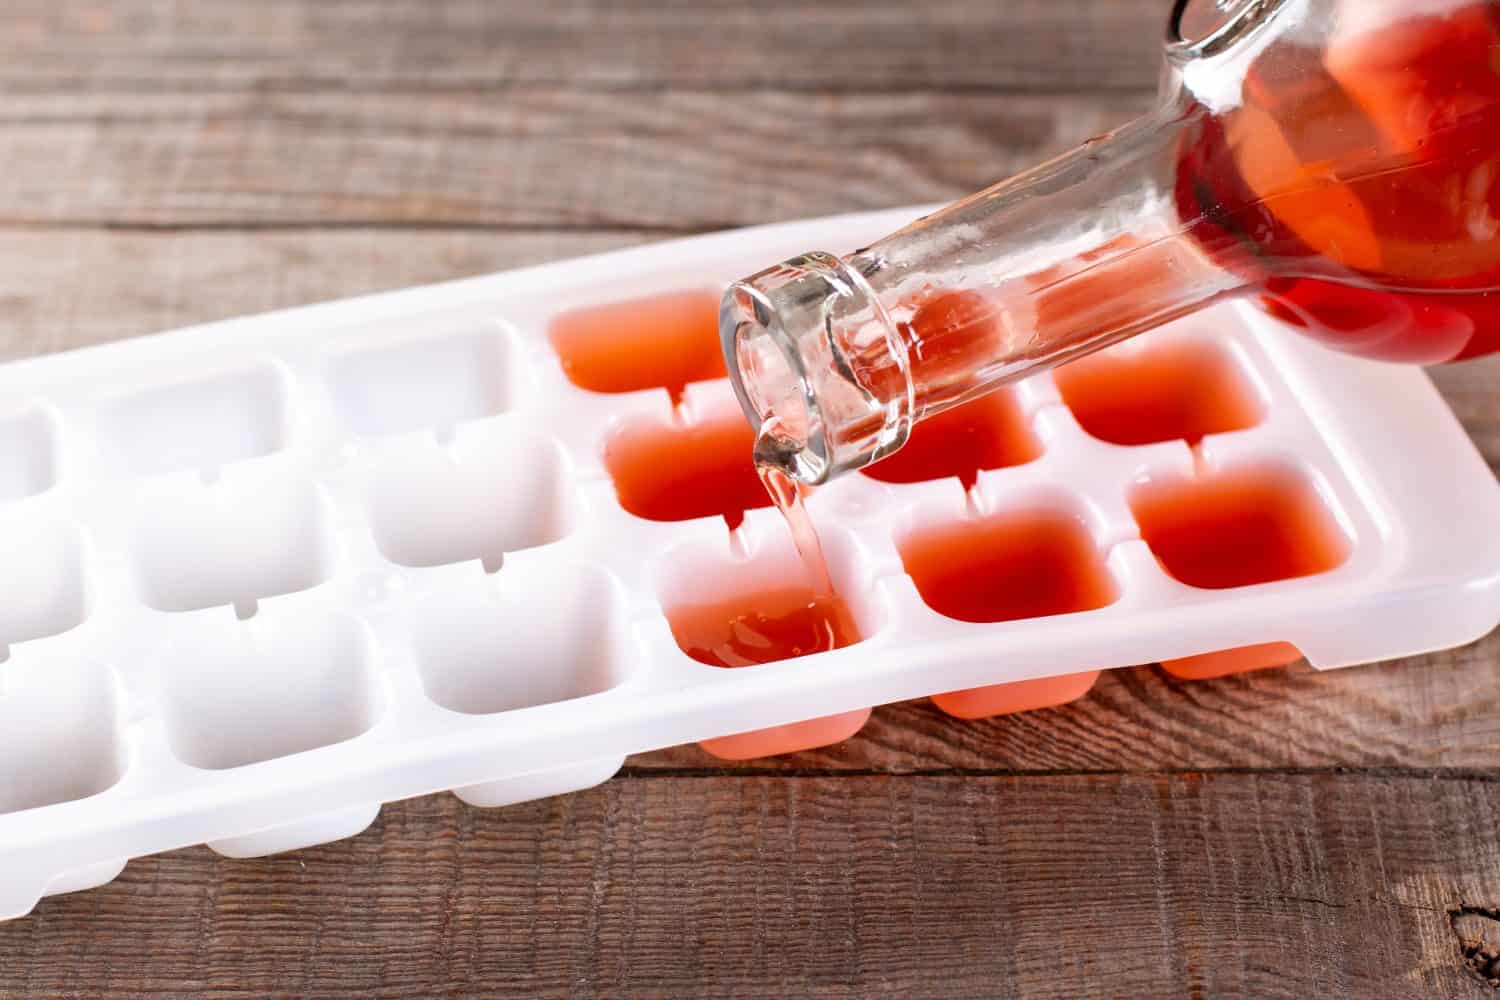 Pouring wine in ice cube tray on a wooden table